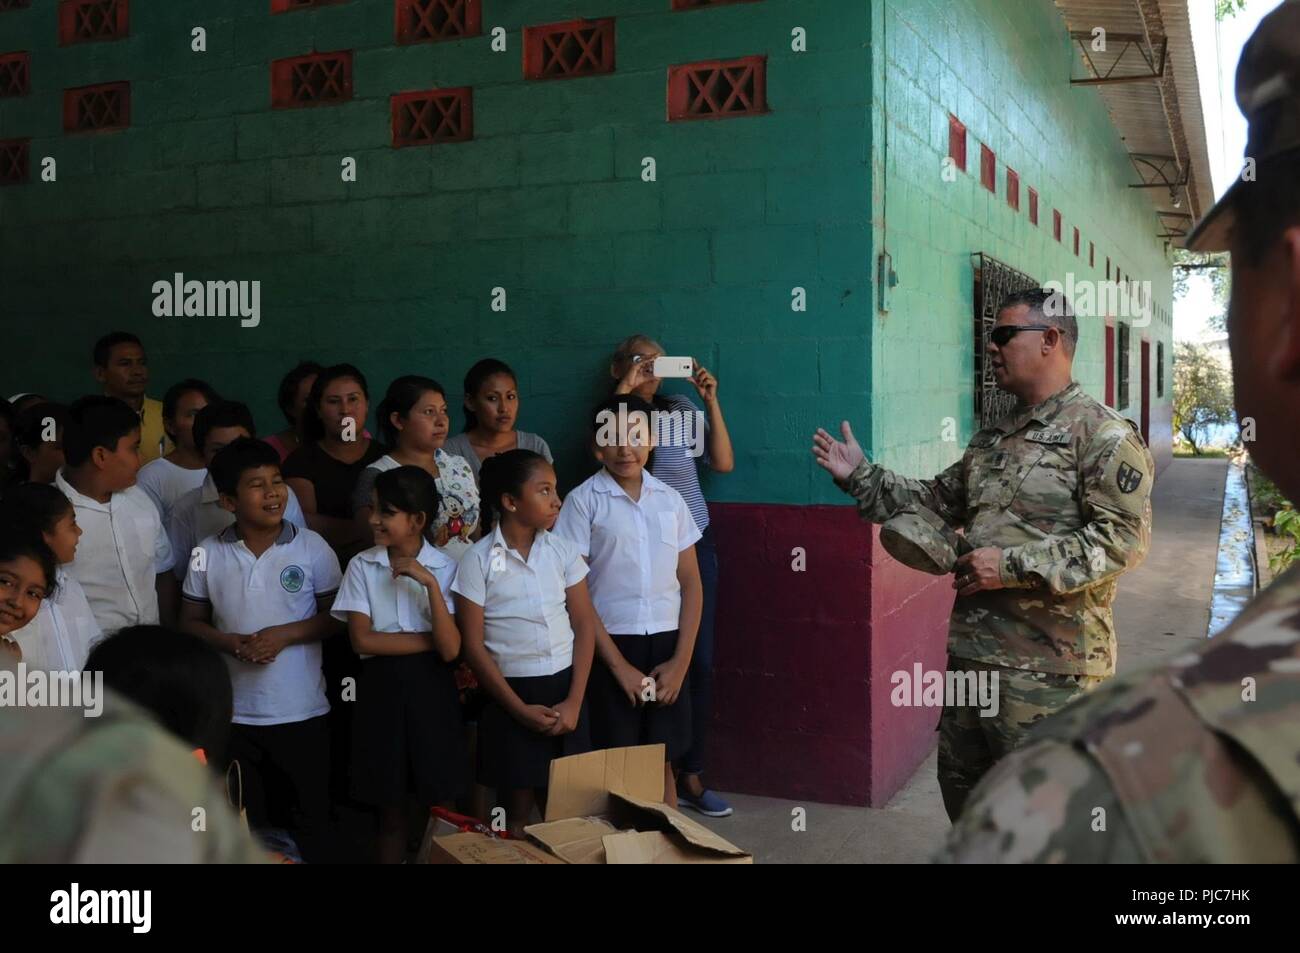 Sgt. Maj. William Lopez from the Puerto Rican National Guard Joint Force Headquarters serving as the Command Sergeant Major for the Combined Joint Task Force-Hope in El Salvador, speaks to the students of the El Amate community after Soldiers from the 413th Civil Affairs Battalion delivered donated goods from Puerto Rico during the Beyond the Horizon 2018 exercise. Beyond the Horizon 2018, (BTH) is an exercise deploying active Army, National Guard and Reserve Soldiers. These are two-week rotations for Soldiers to work with the El Salvadoran military and civic agencies bringing vital services a Stock Photo